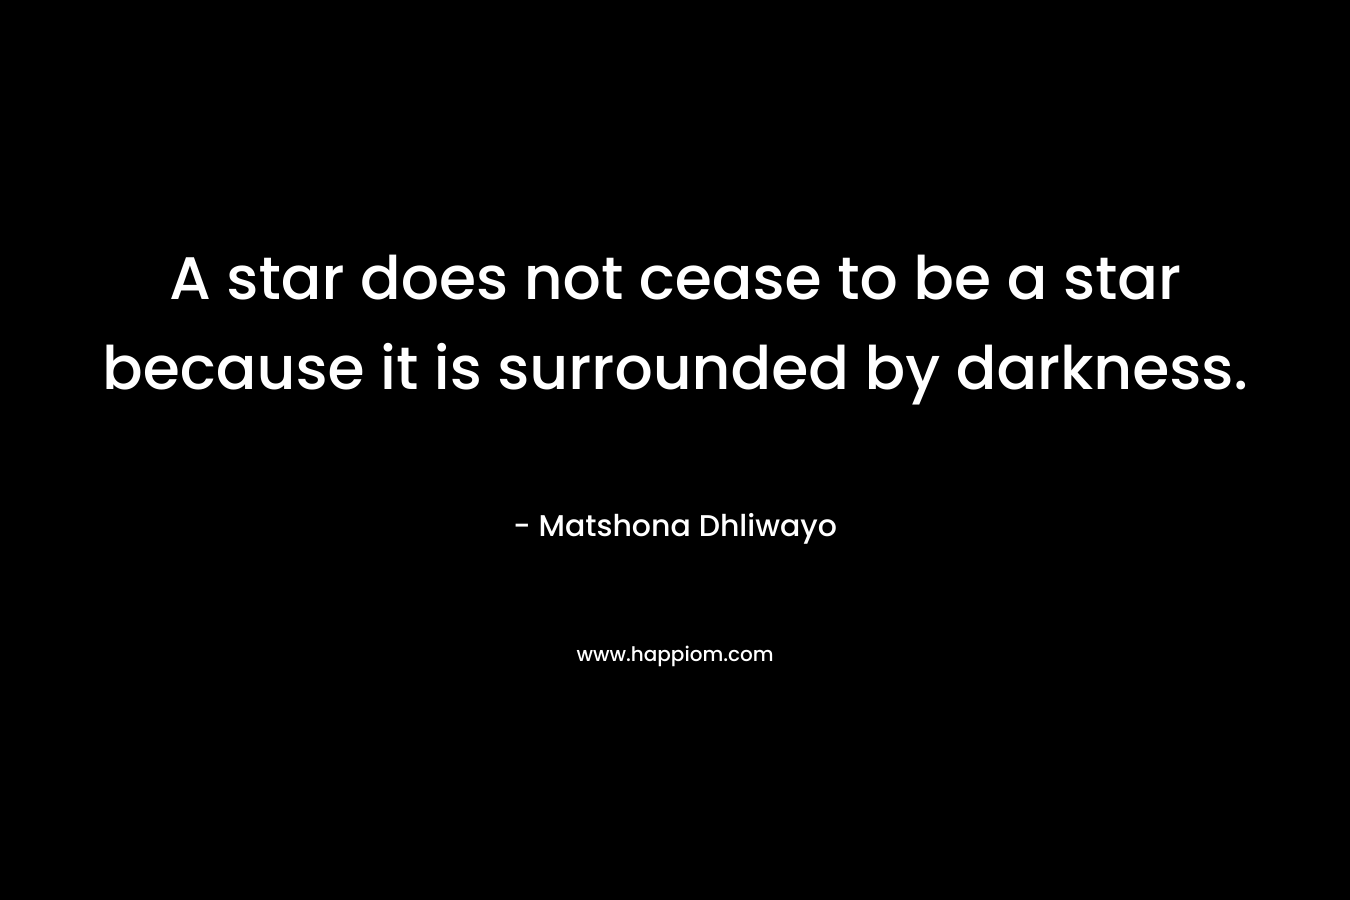 A star does not cease to be a star because it is surrounded by darkness.